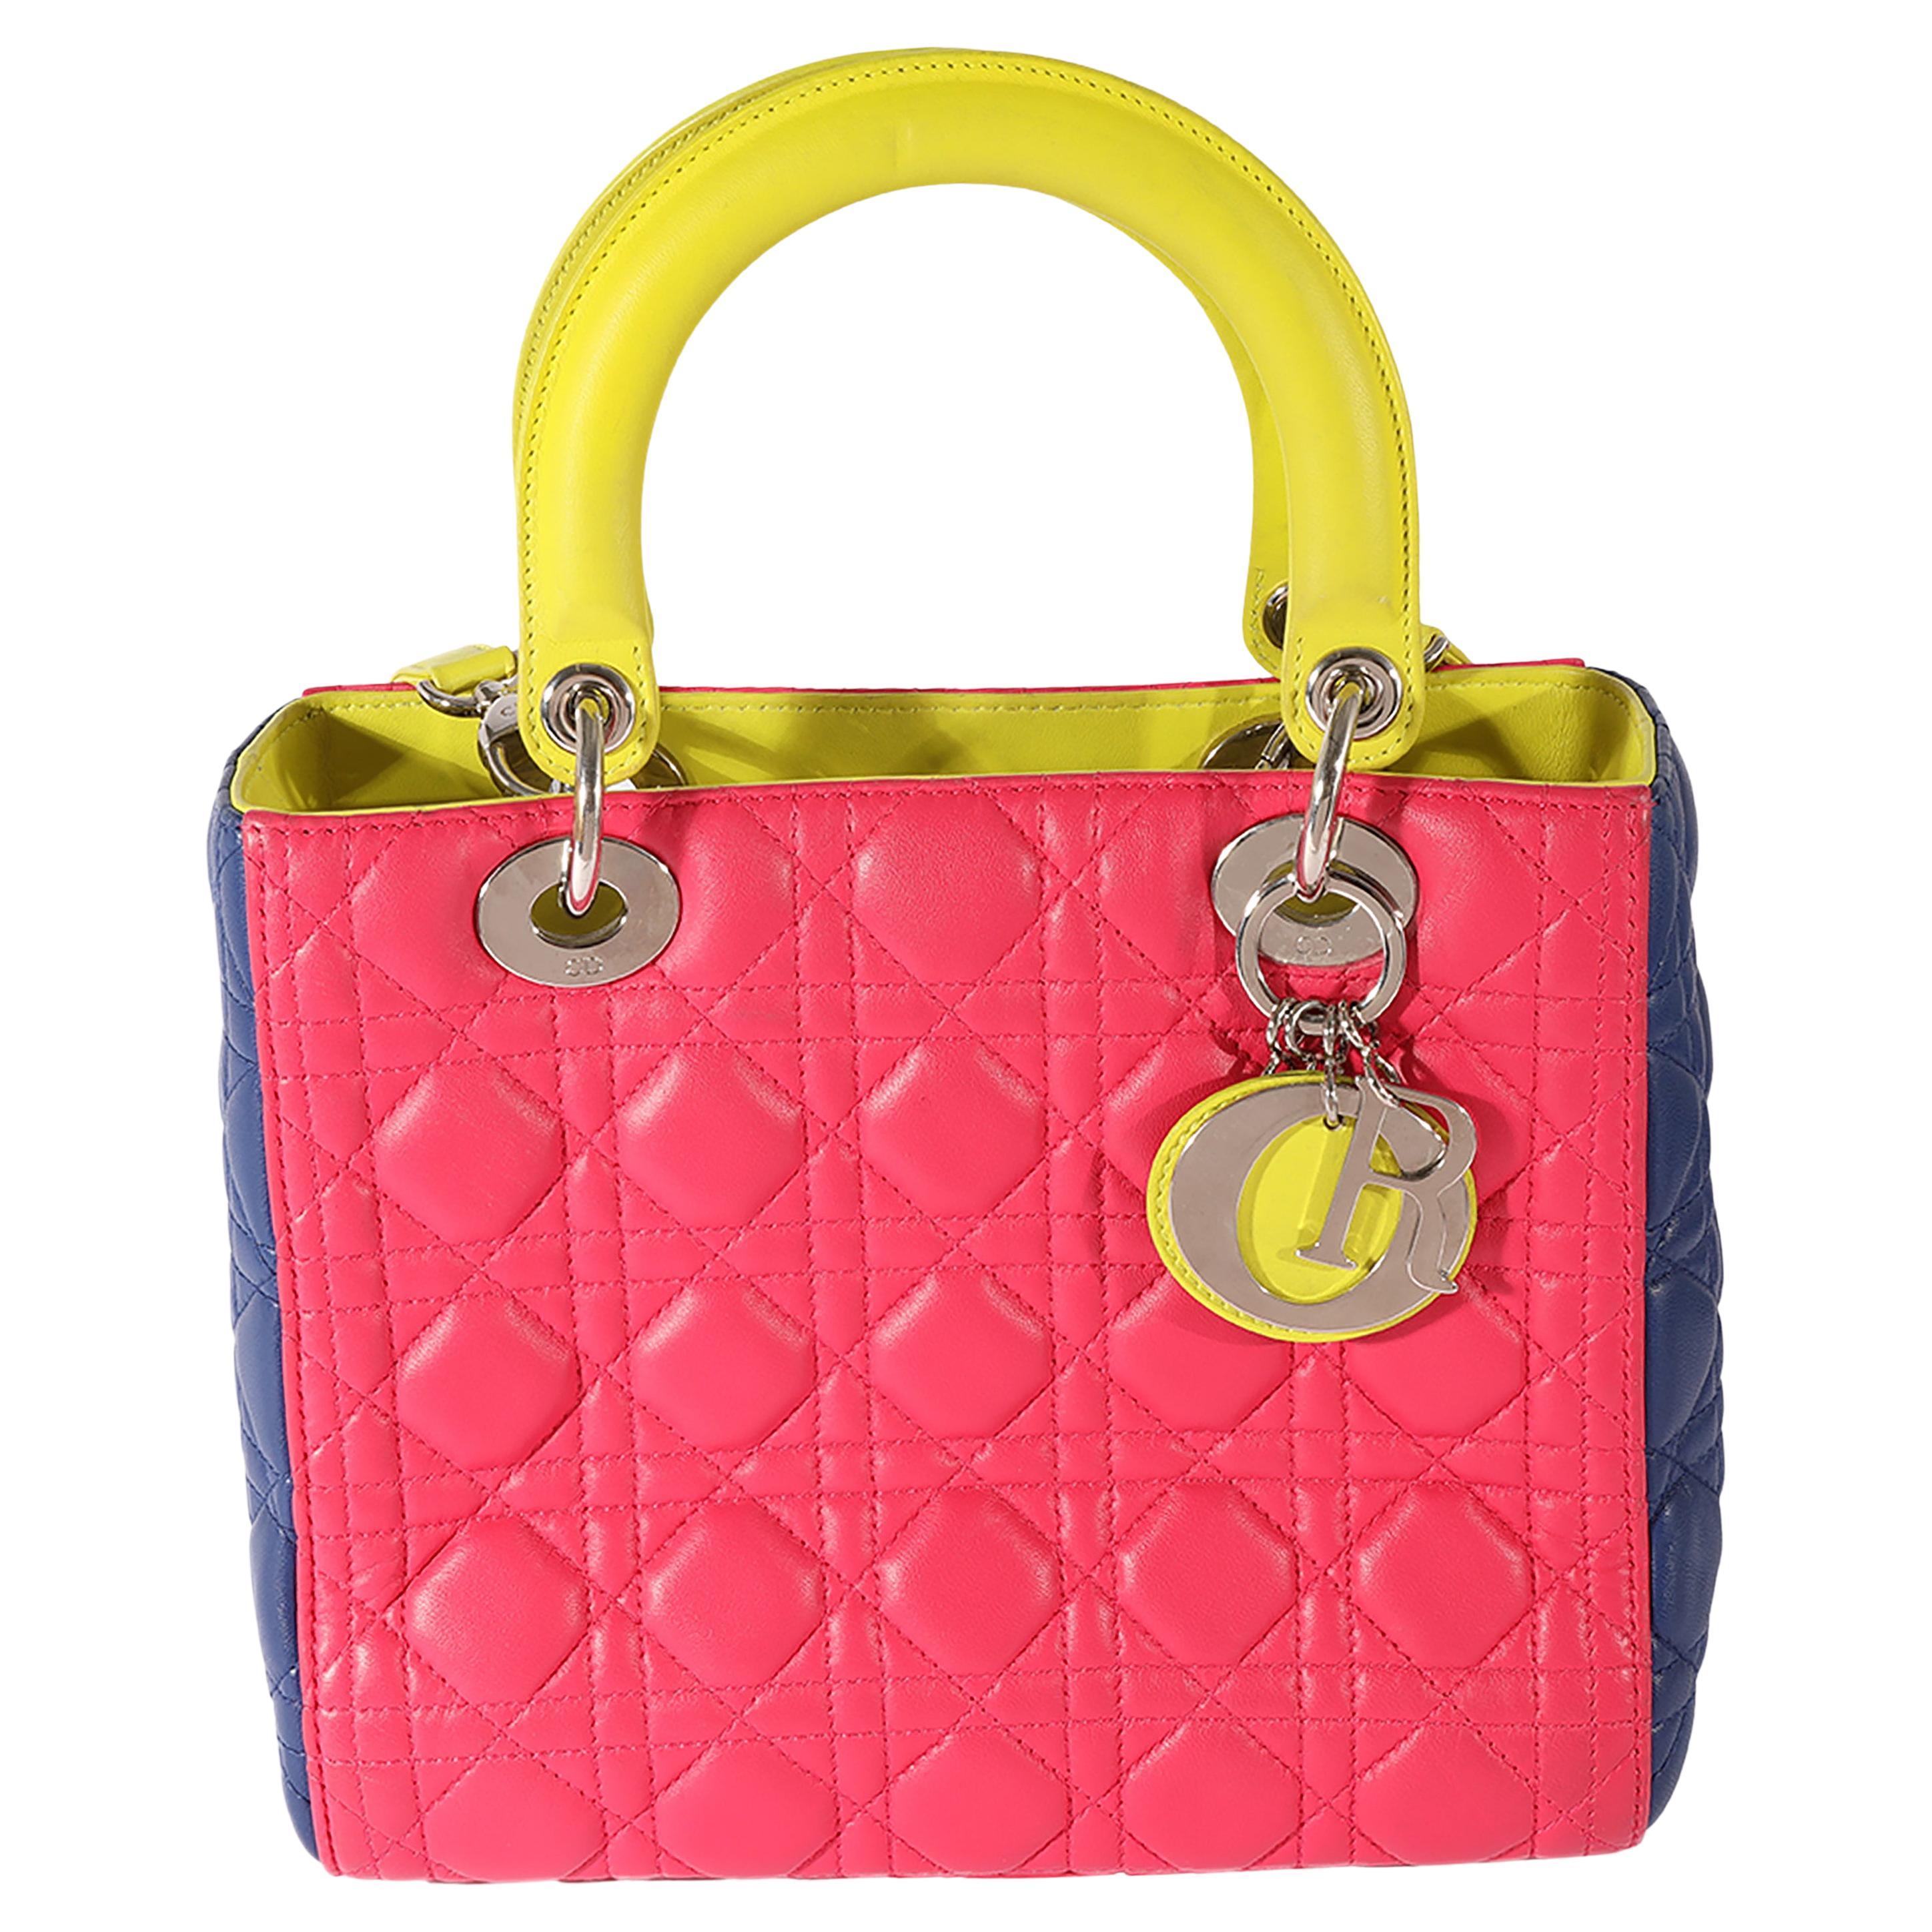 Dior Tricolor Quilted Lambskin Medium Lady Dior Bag